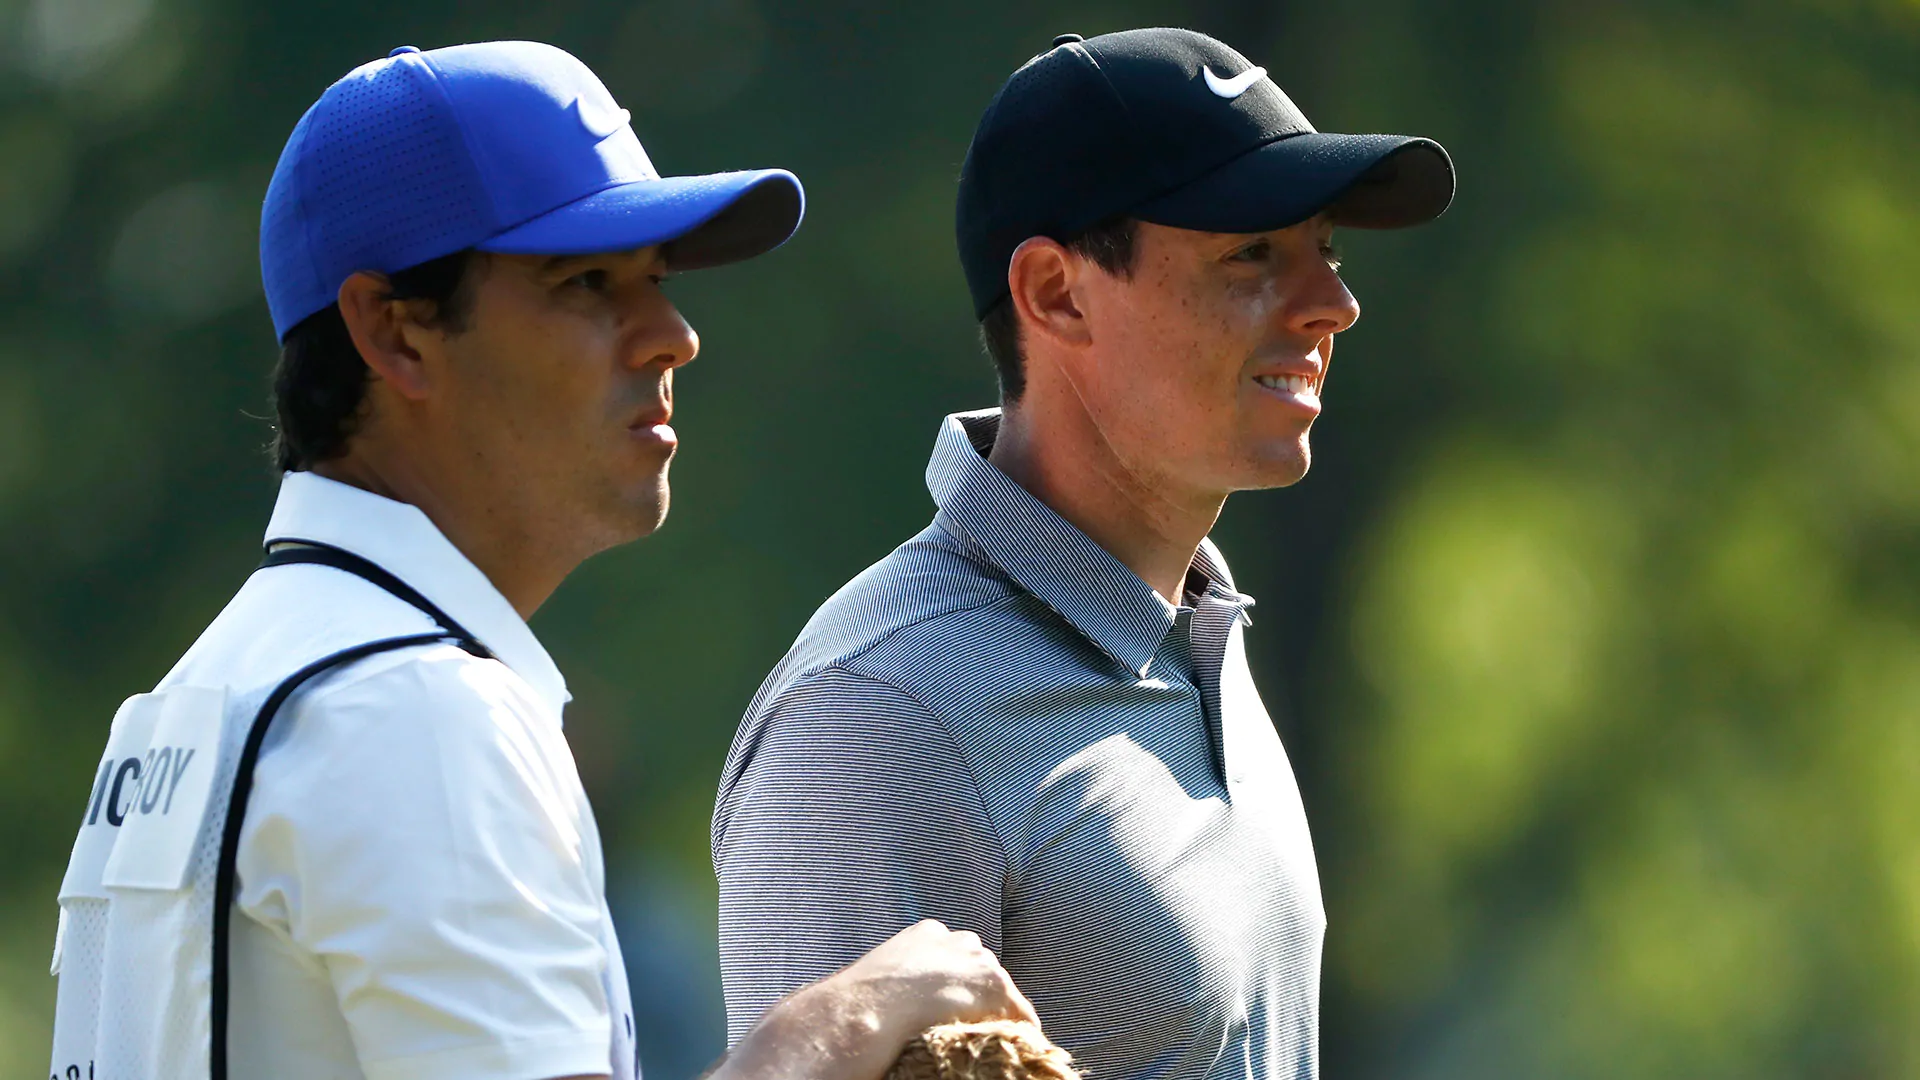 McIlroy calls first round with new caddie 'awesome'